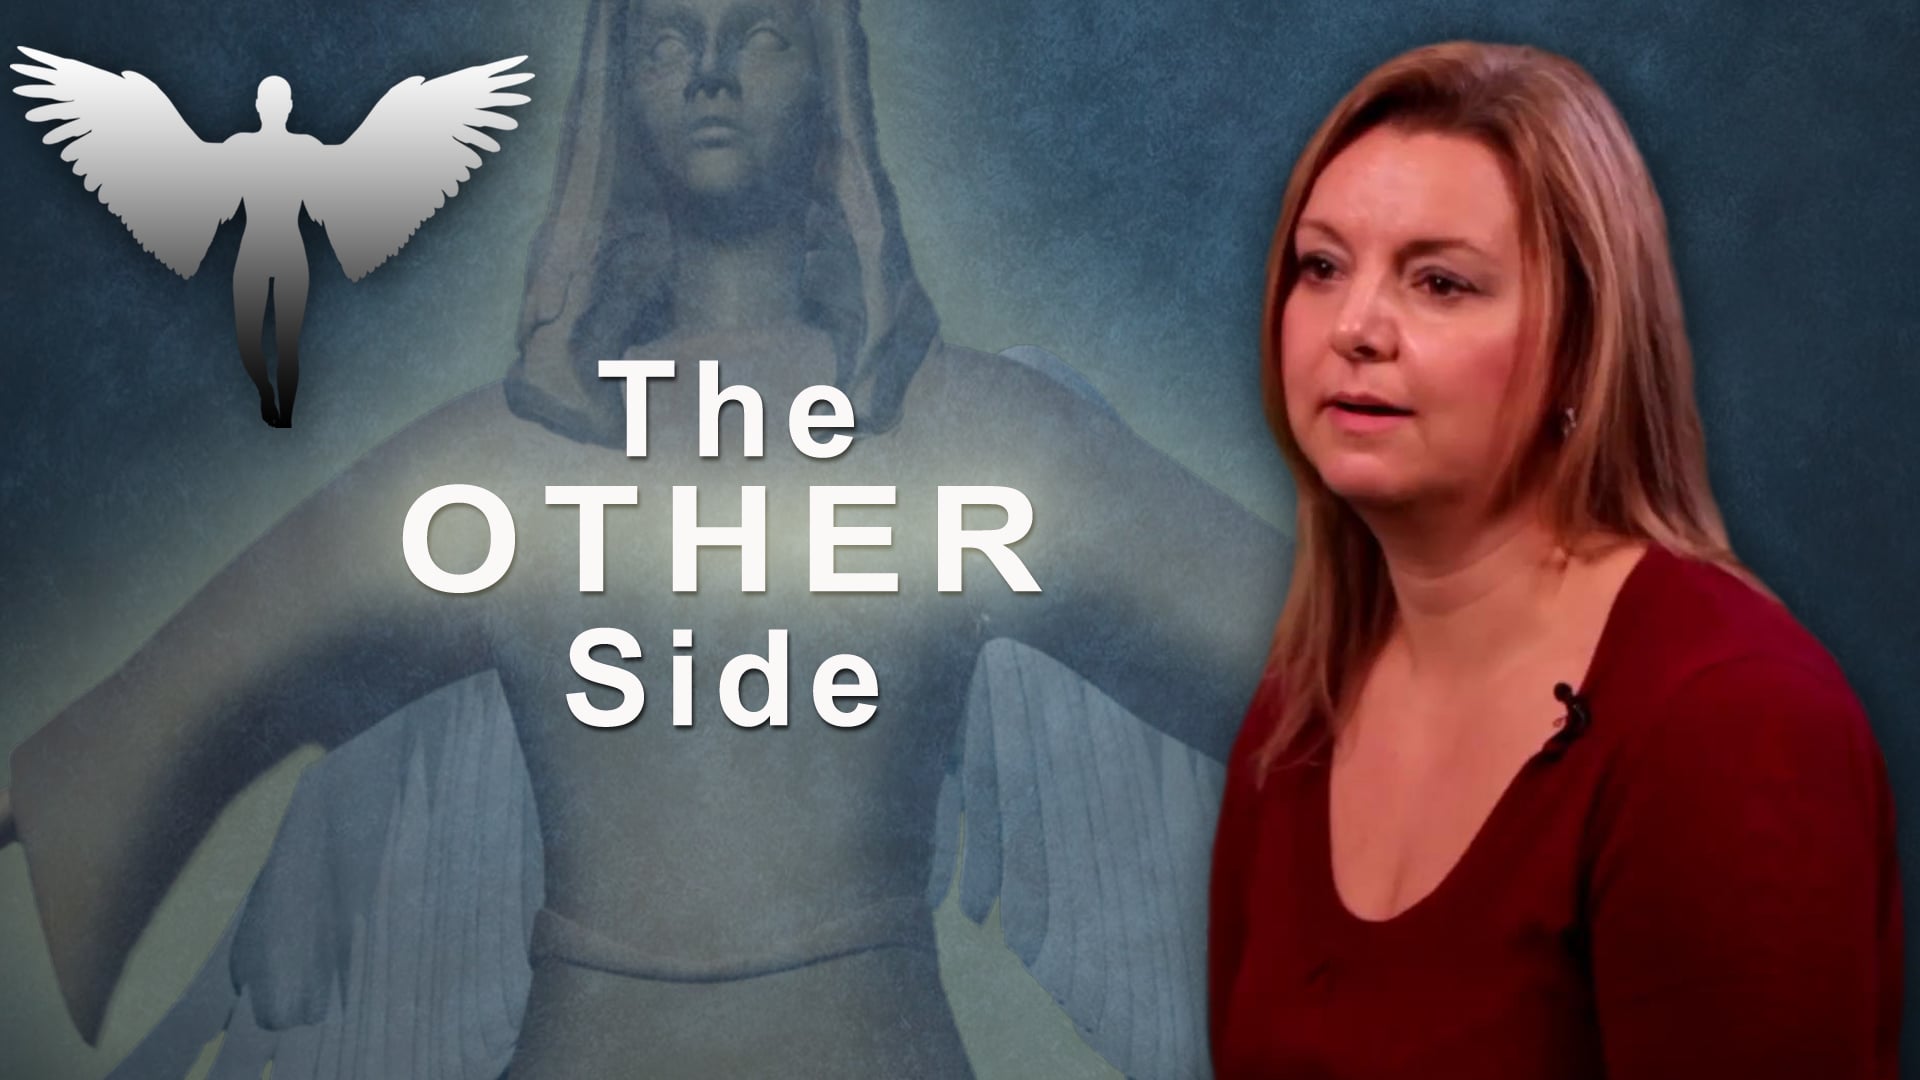 The Other Side: Messages From Angels